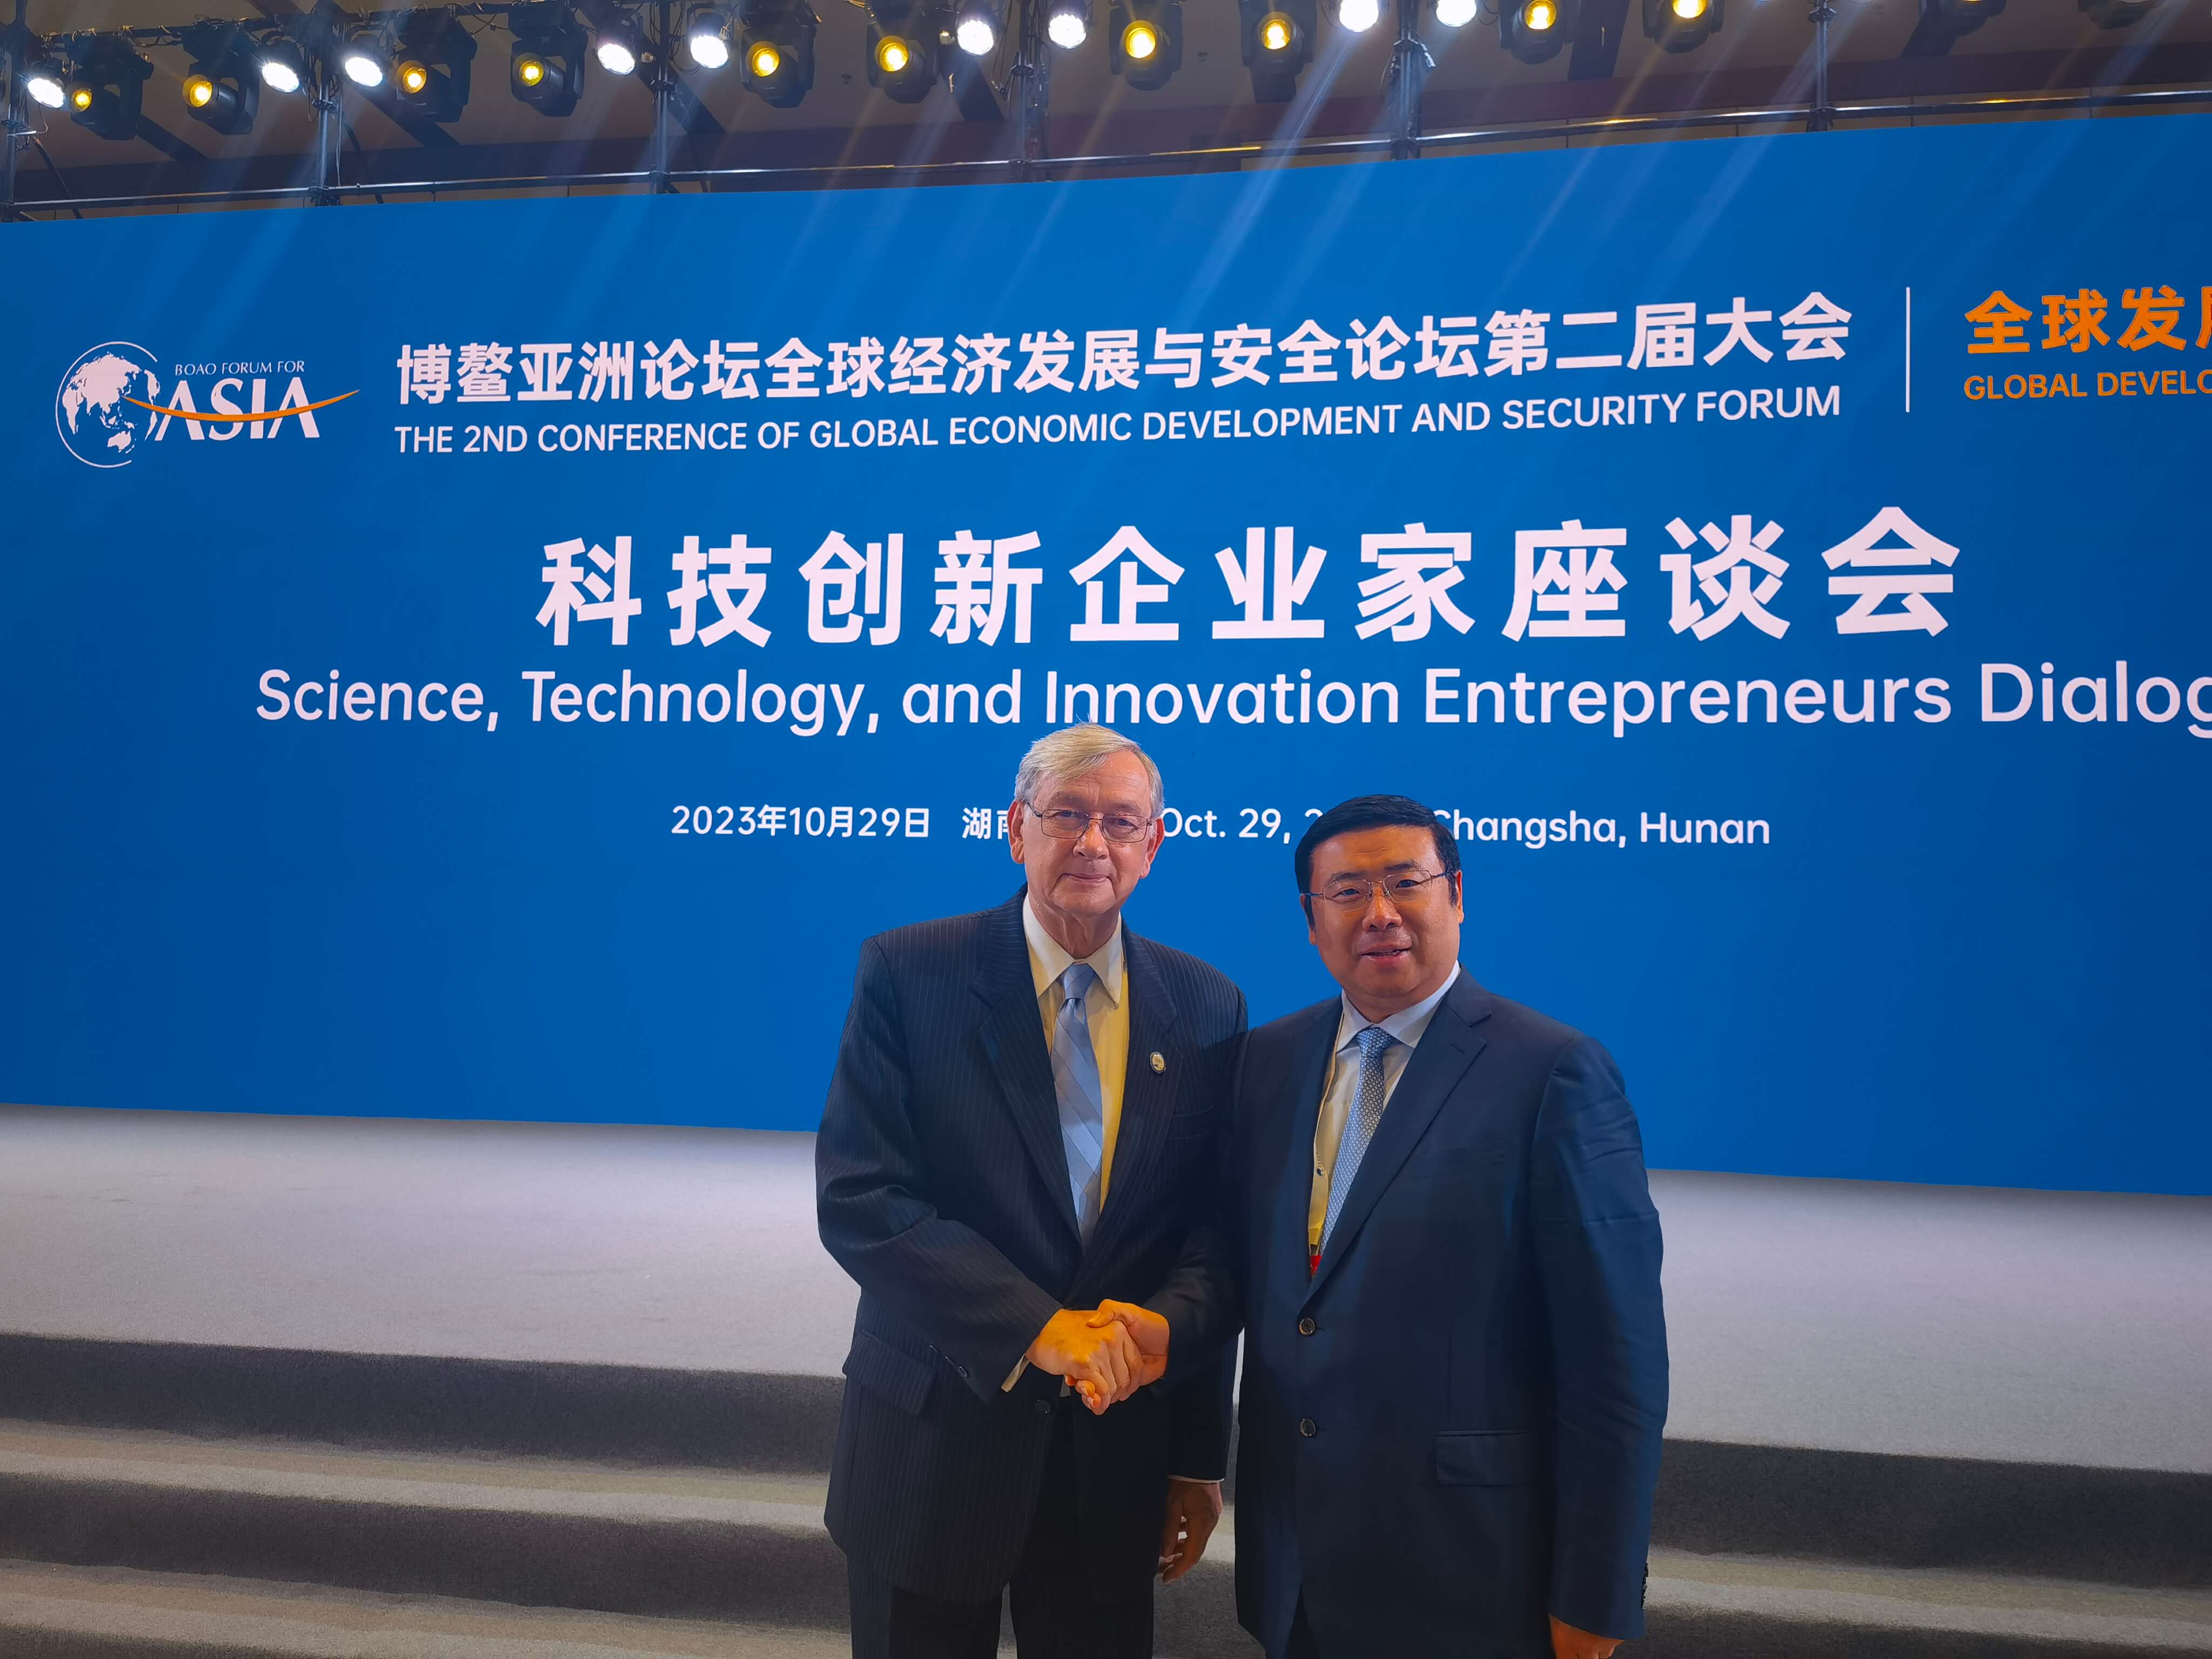 Chairman Li Yong and former Slovenian President Turk took a photo together